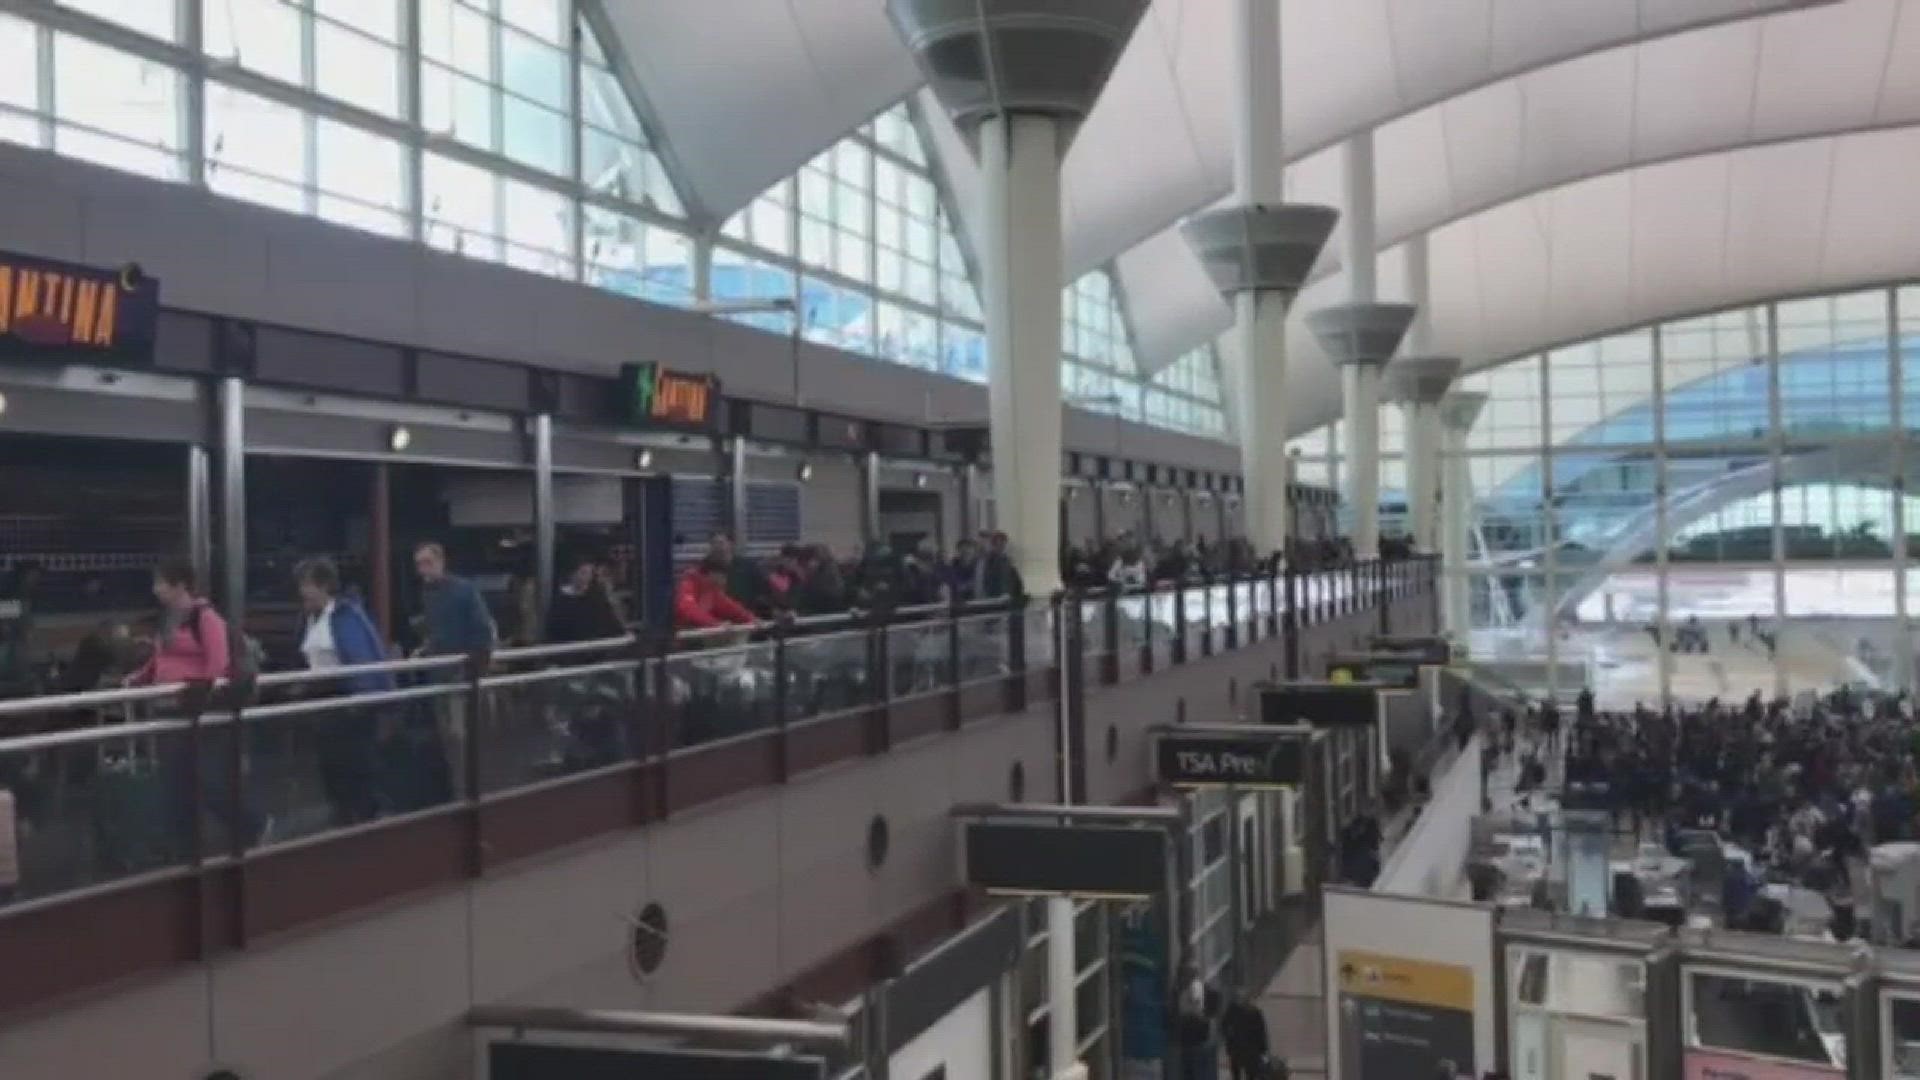 A line of United Airlines passengers continues to grow as customers try to change flights, book bags and more following the closure of Denver International Airport due to Wednesday's blizzard.